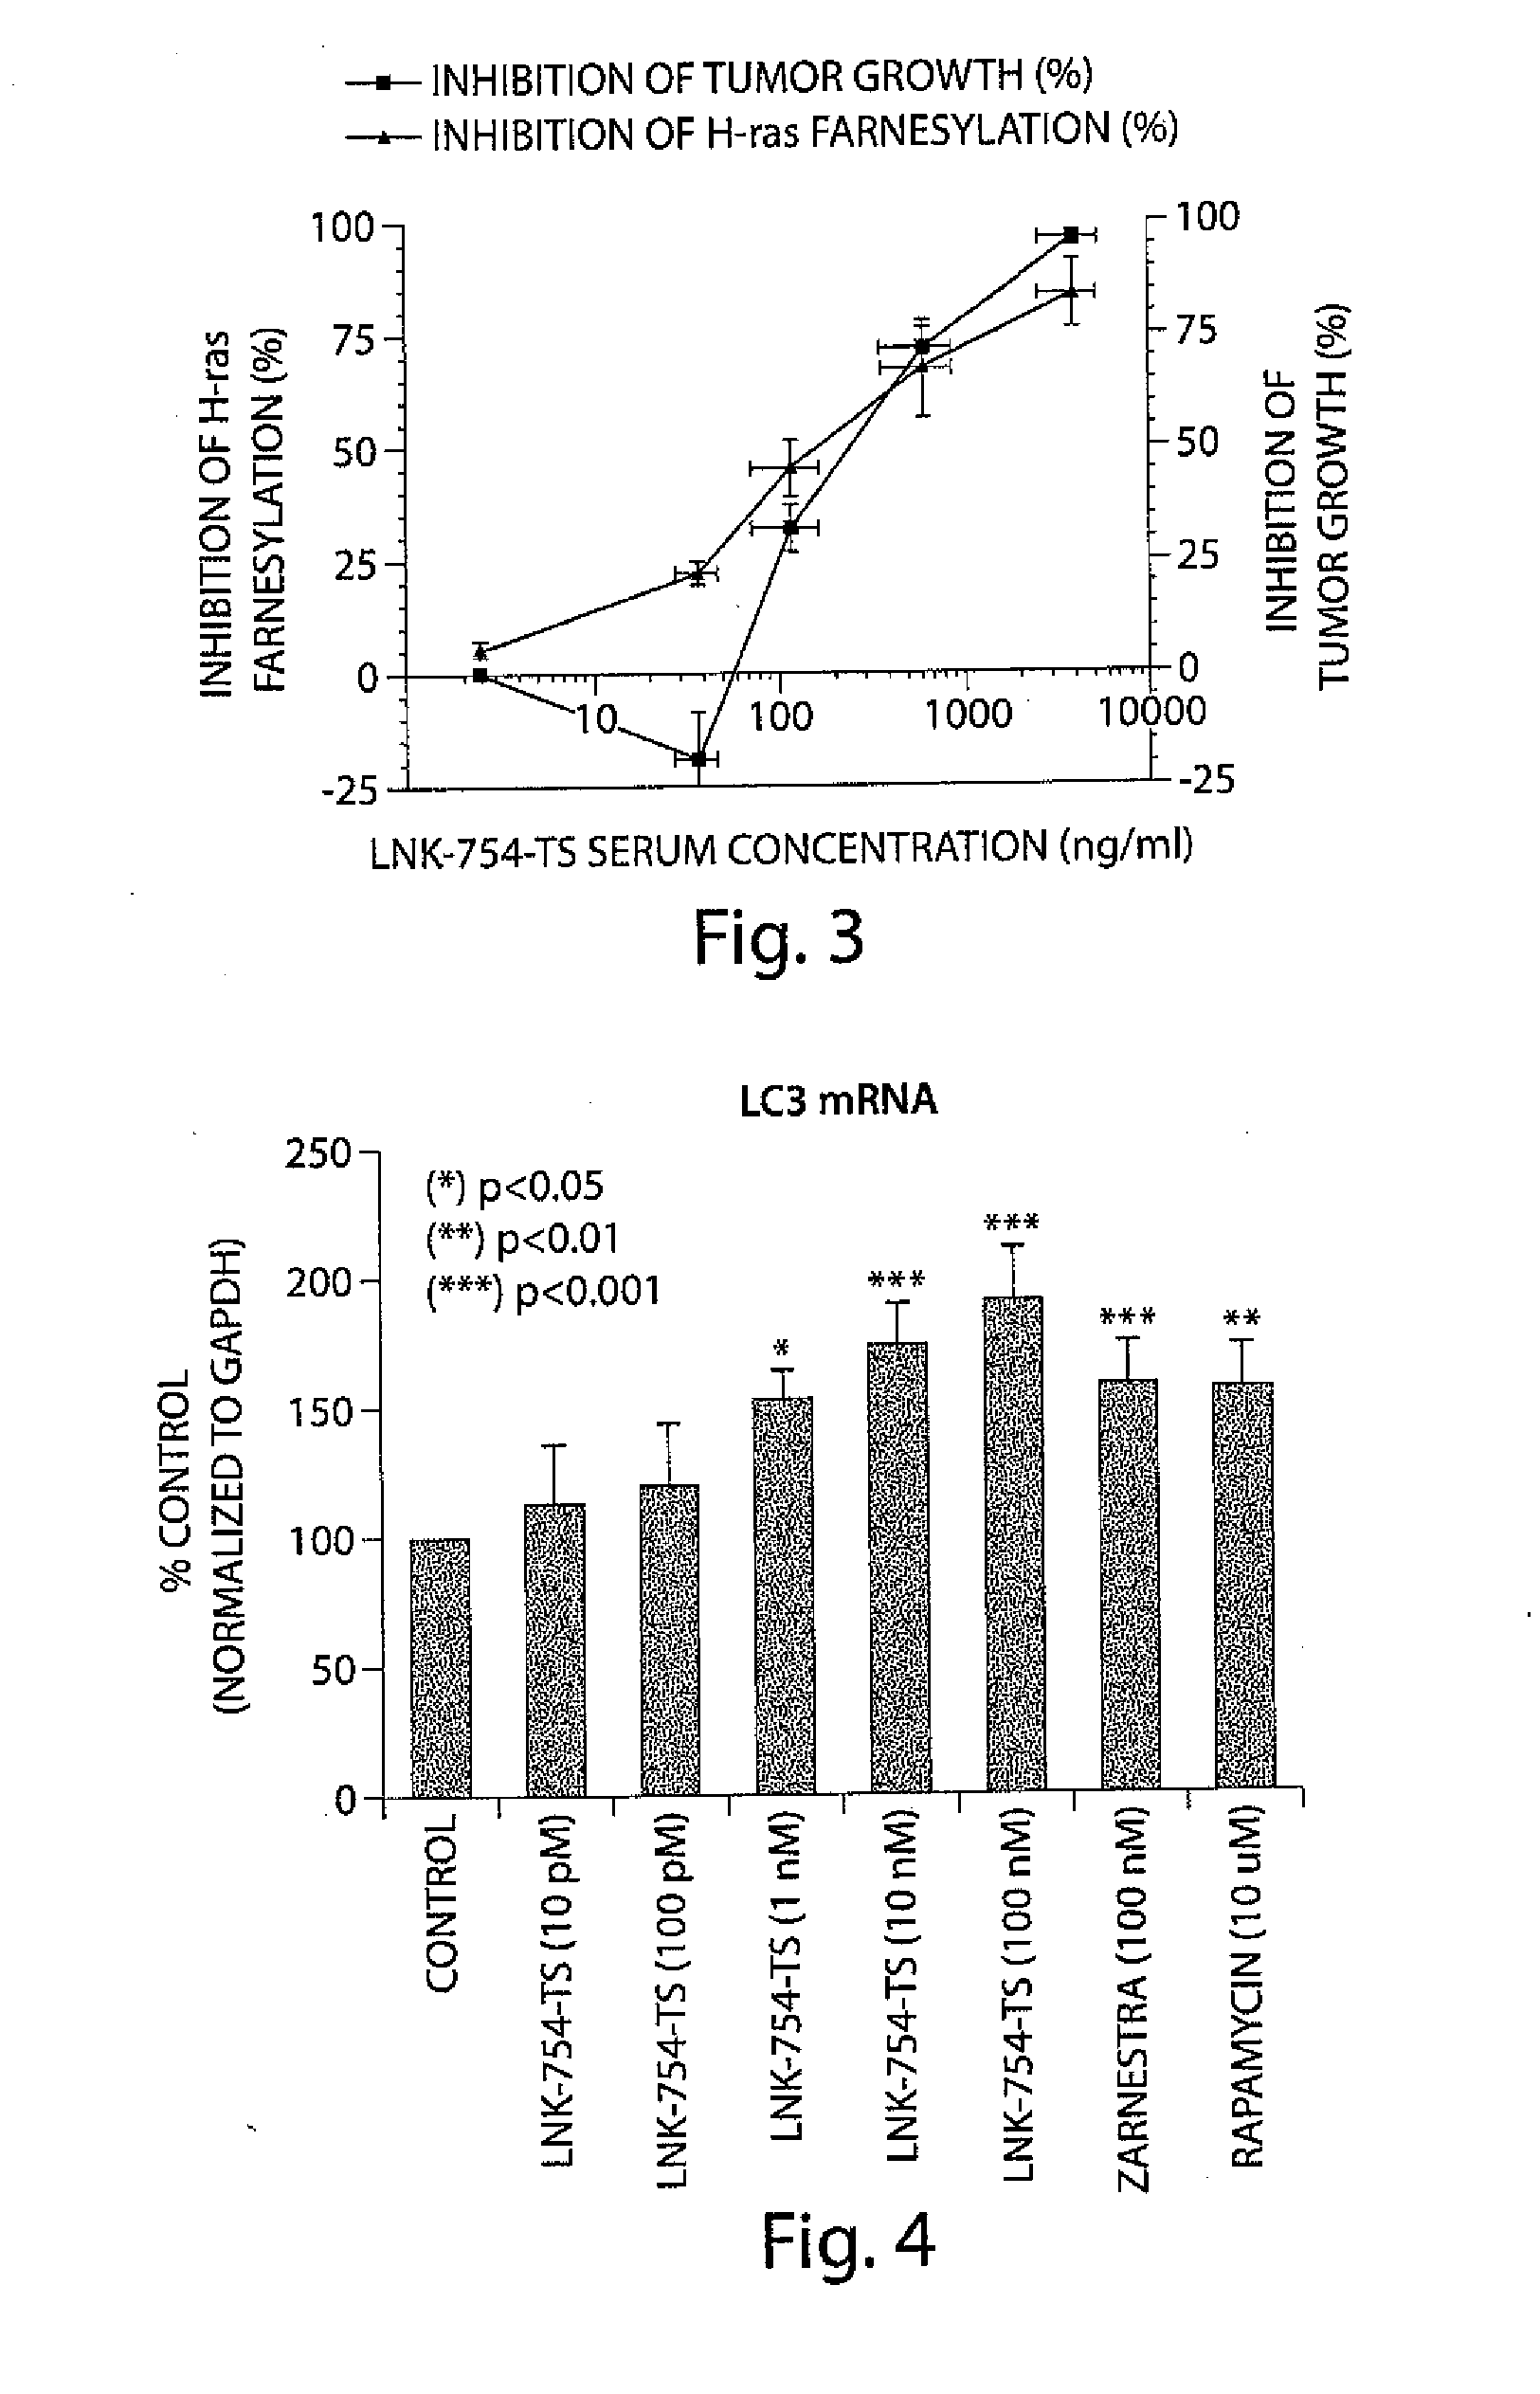 Treatment of mitochondrial disorders using a farnesyl transferase inhibitor